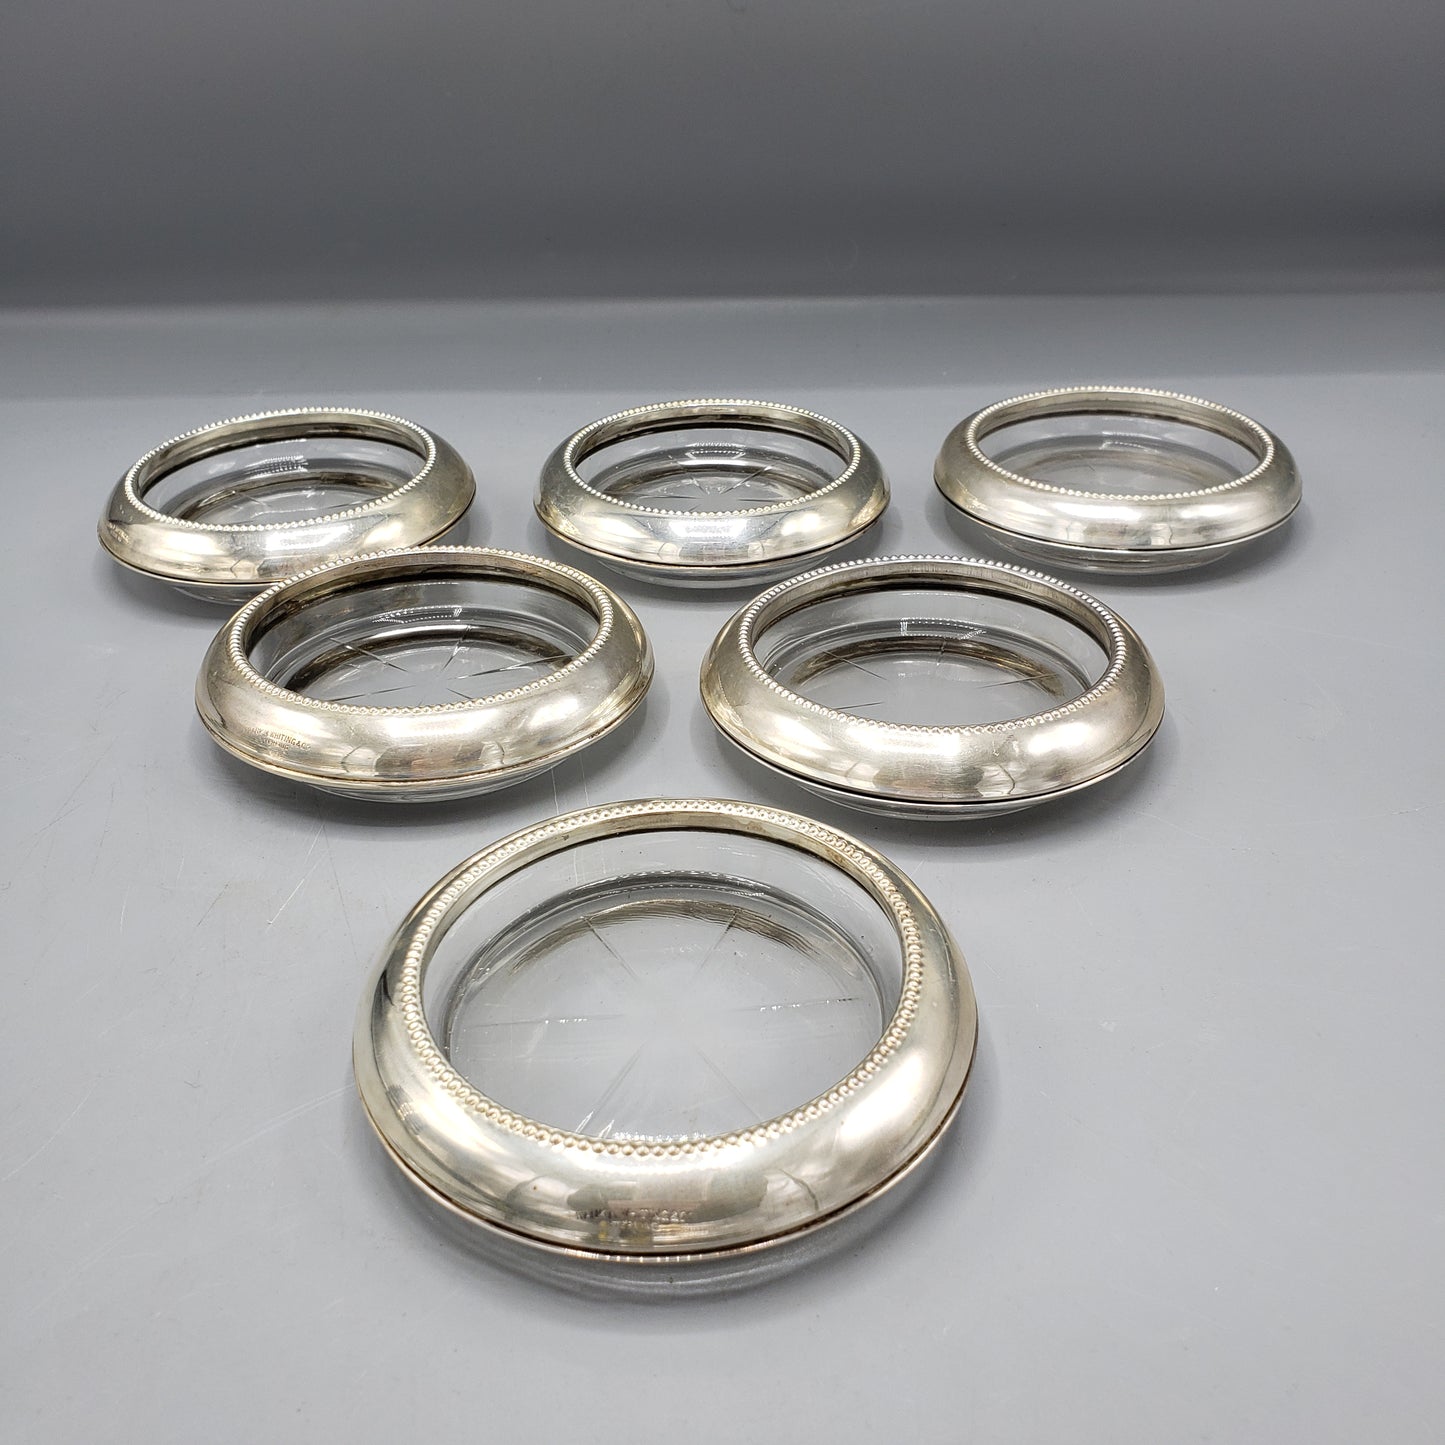 Set of 6 Frank Whiting Sterling Silver and Glass Coasters / Ashtrays